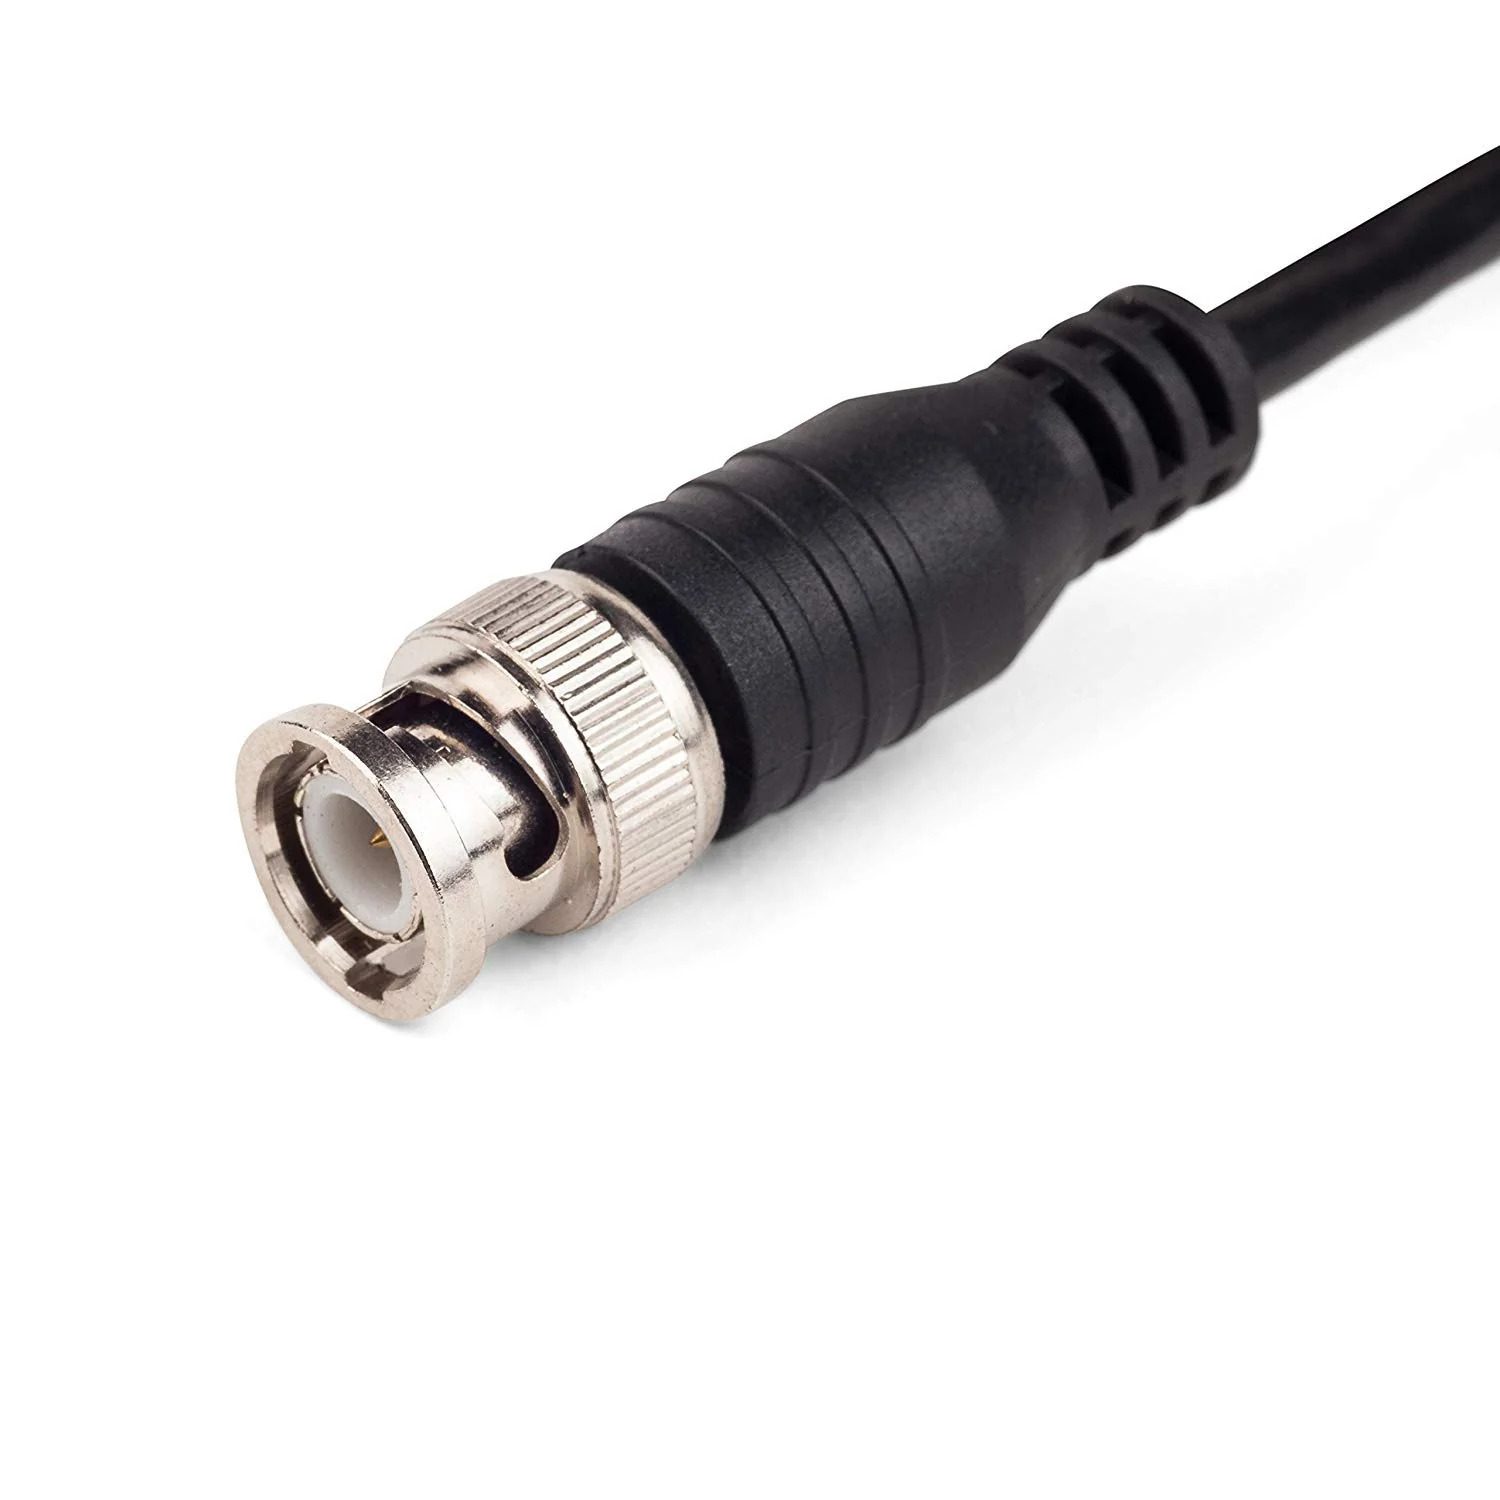 Steren 15ft BNC-BNC RG58 Coaxial Cable - image 1 of 3